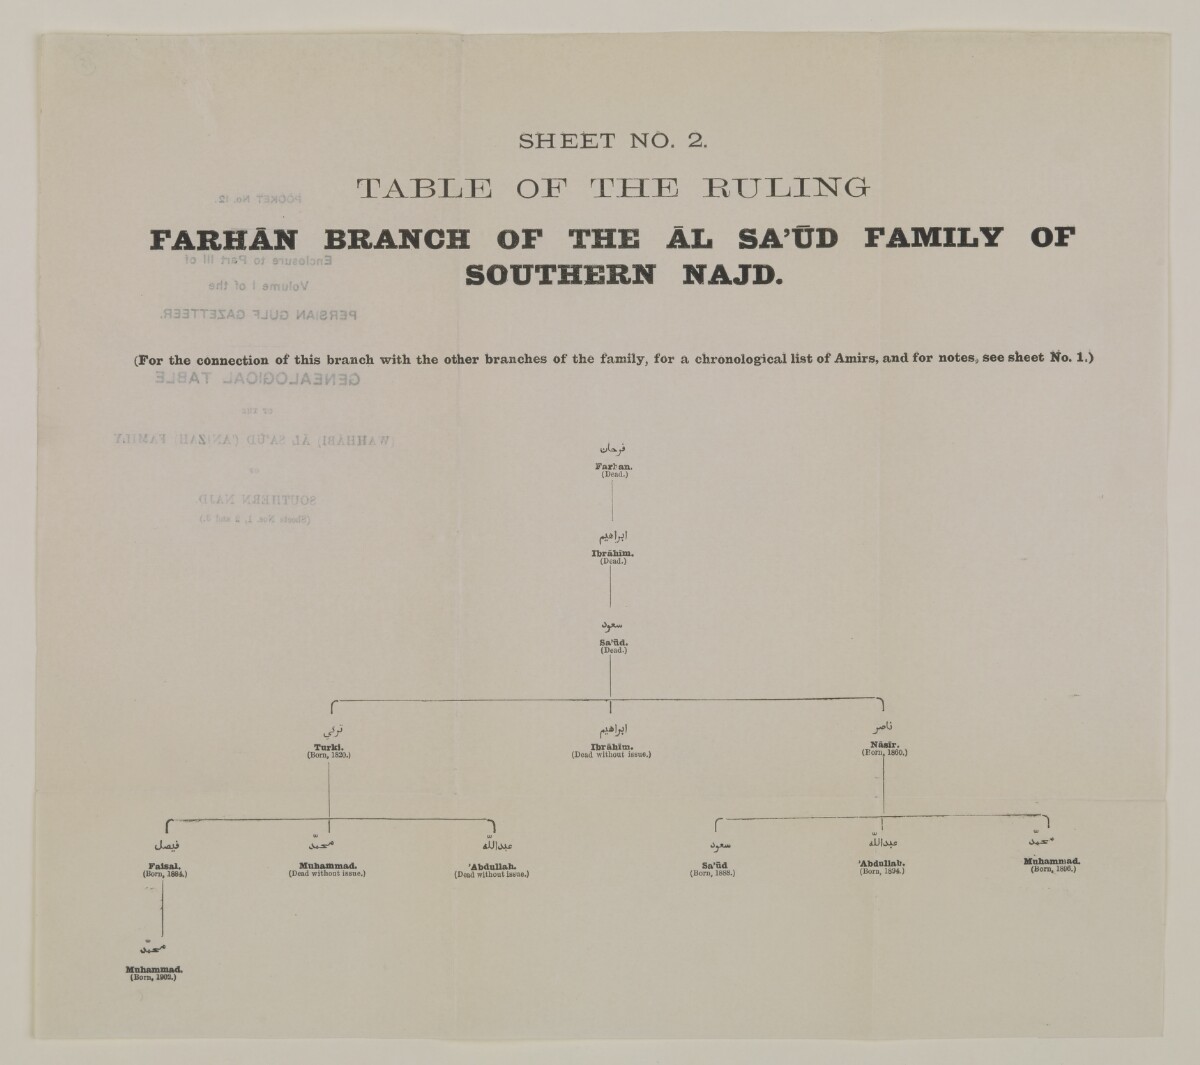 'Pocket No. 12: Enclosure to Part III of Volume I of the Persian Gulf Gazetteer: Genealogical Table of the (Wahhābi) Āl Sa’ūd (’Anizah) Family of Southern Najd (Sheets Nos. 1, 2 and 3.)' [Sheet No. 2] [&lrm;15v] (2/2)